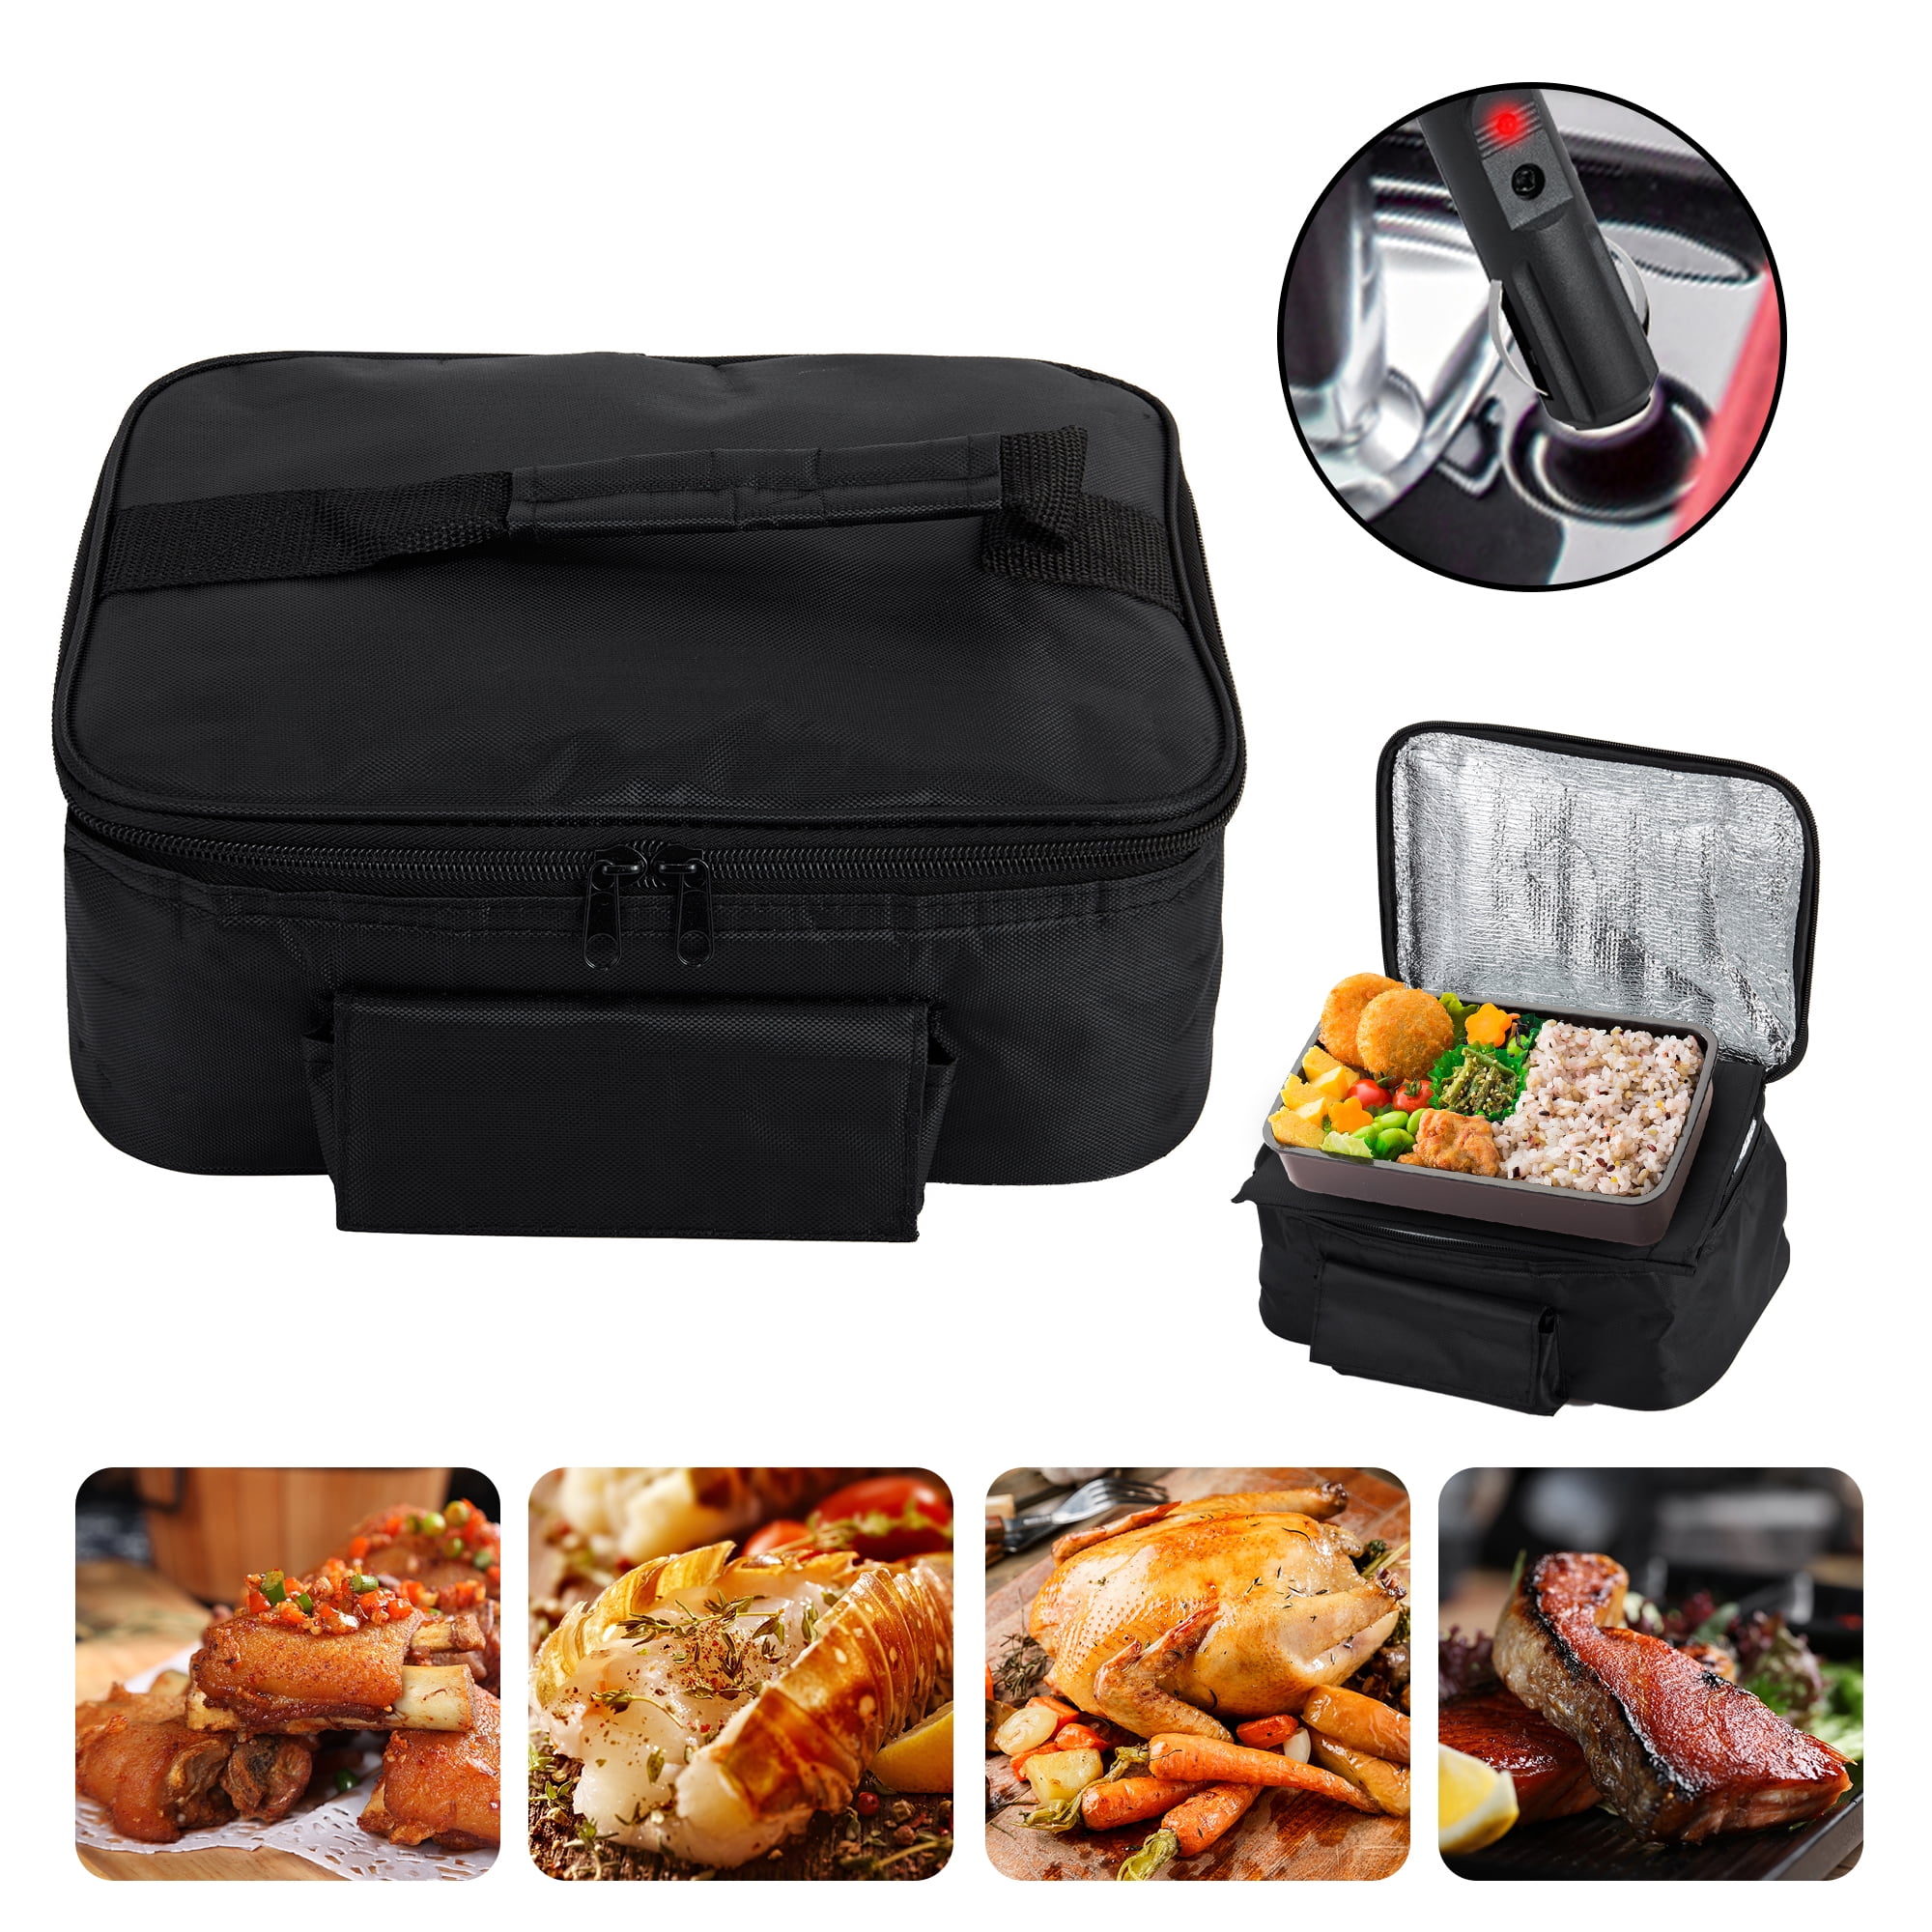 12V Portable Oven Heated Lunch Box - Eastern Watersports